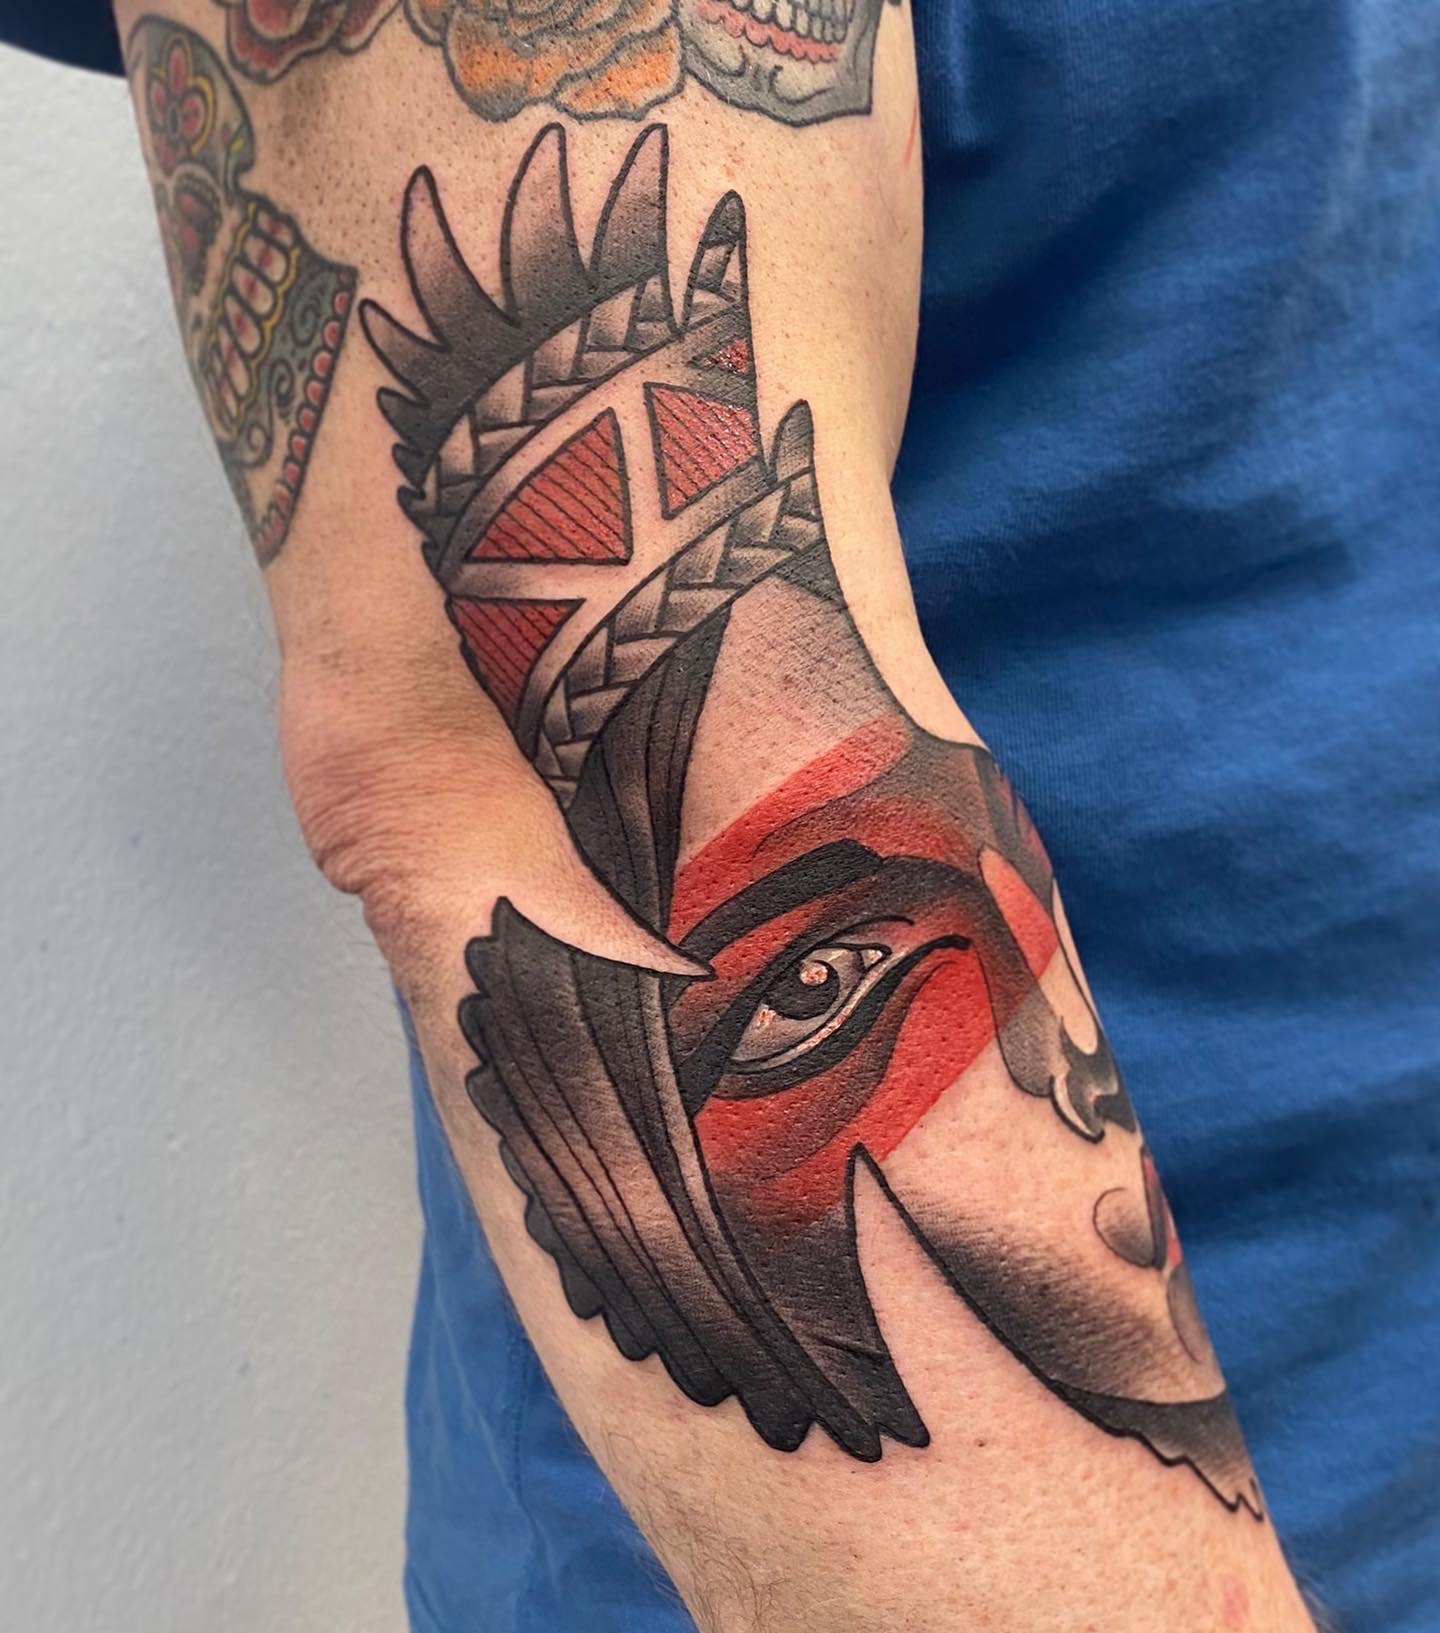 Neo traditional/new traditional country/hardcore country tattoo styles